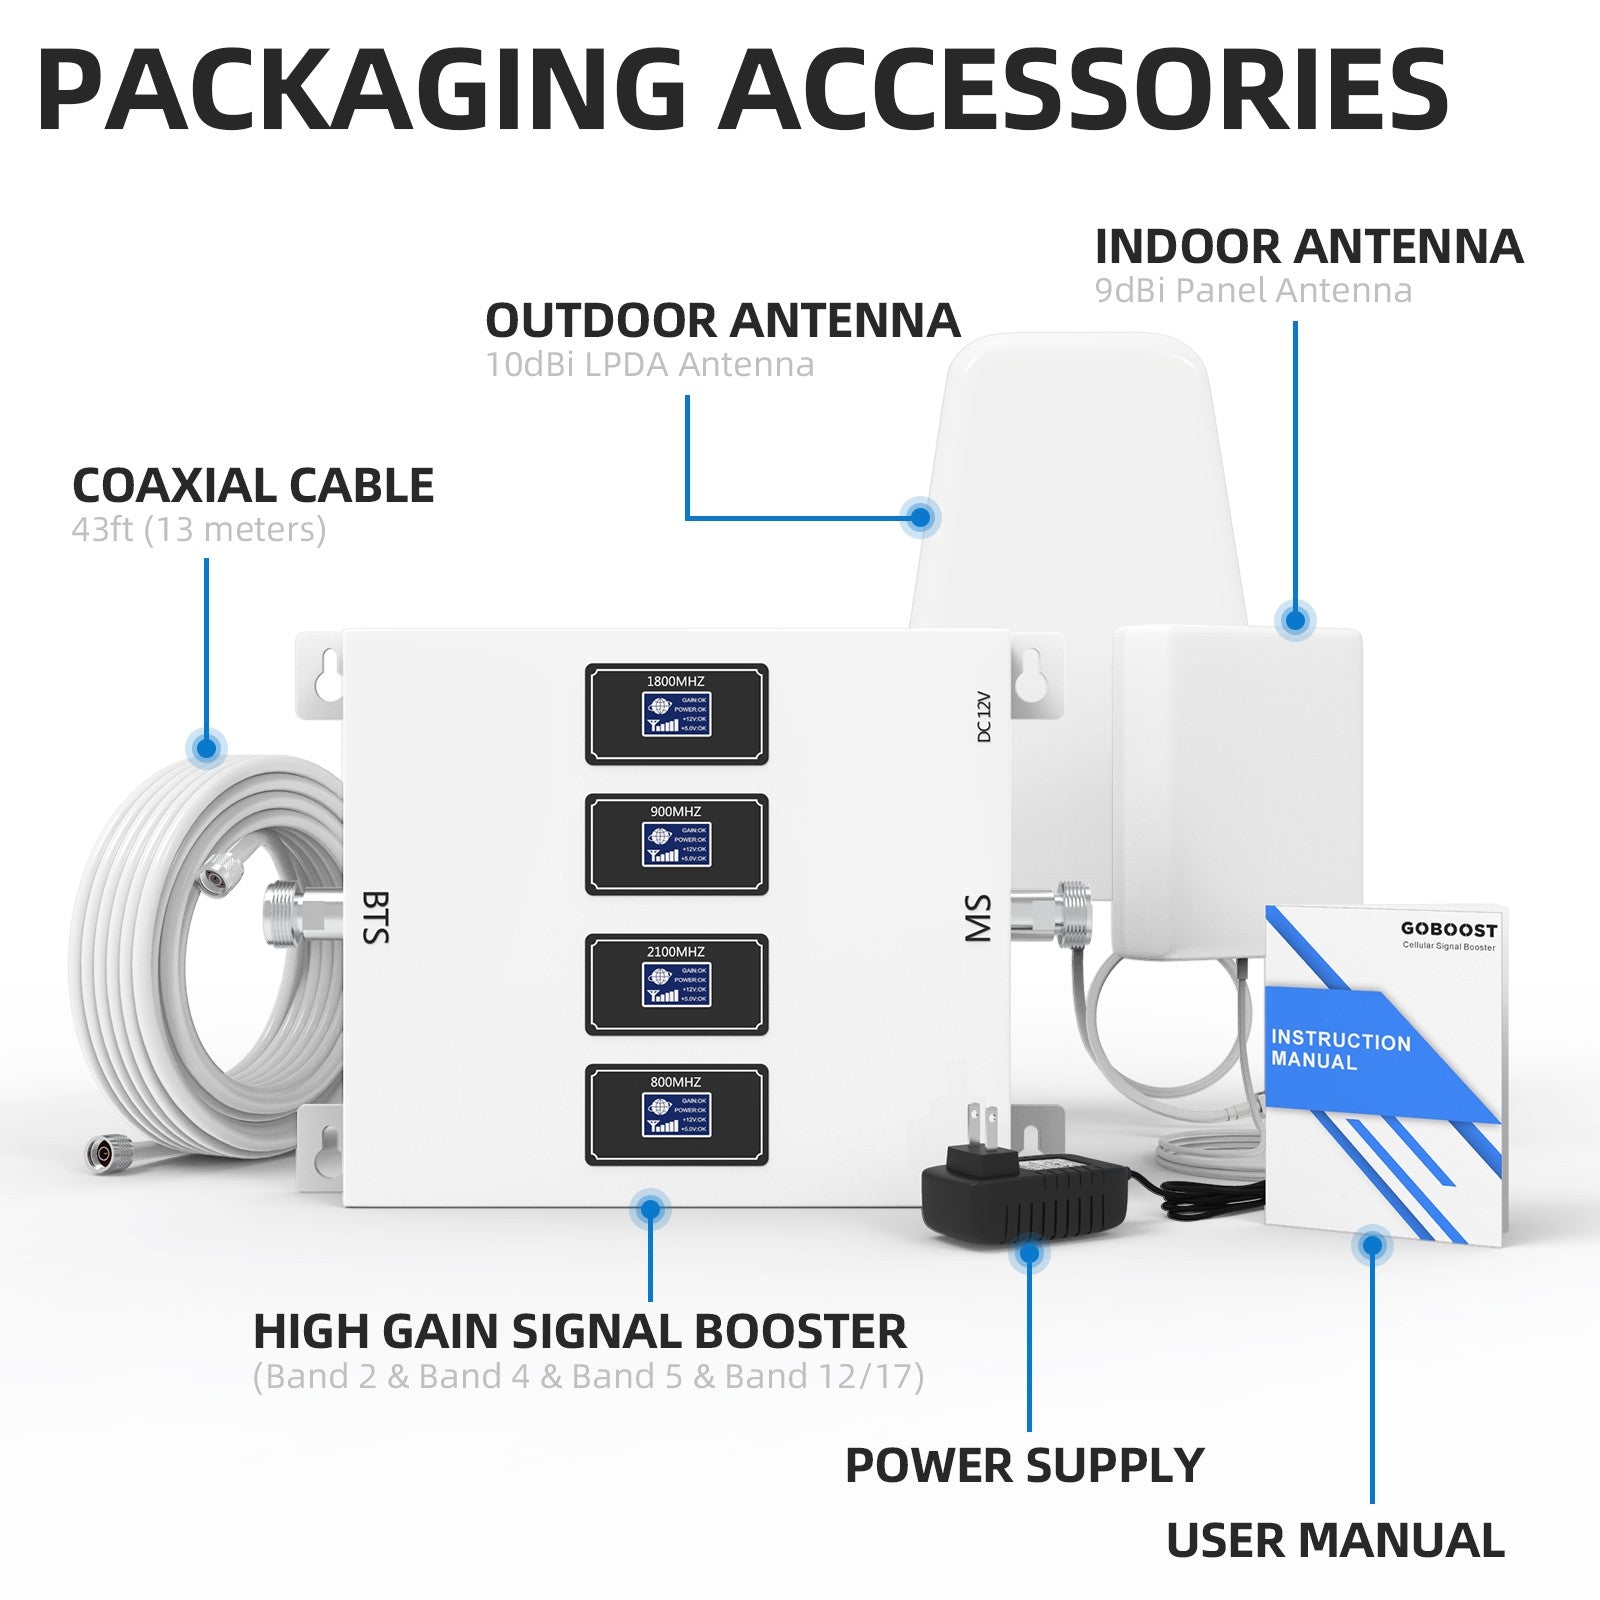 GOBOOST Four Band Signal Booster with LPDA Antenna Packaging Accessories